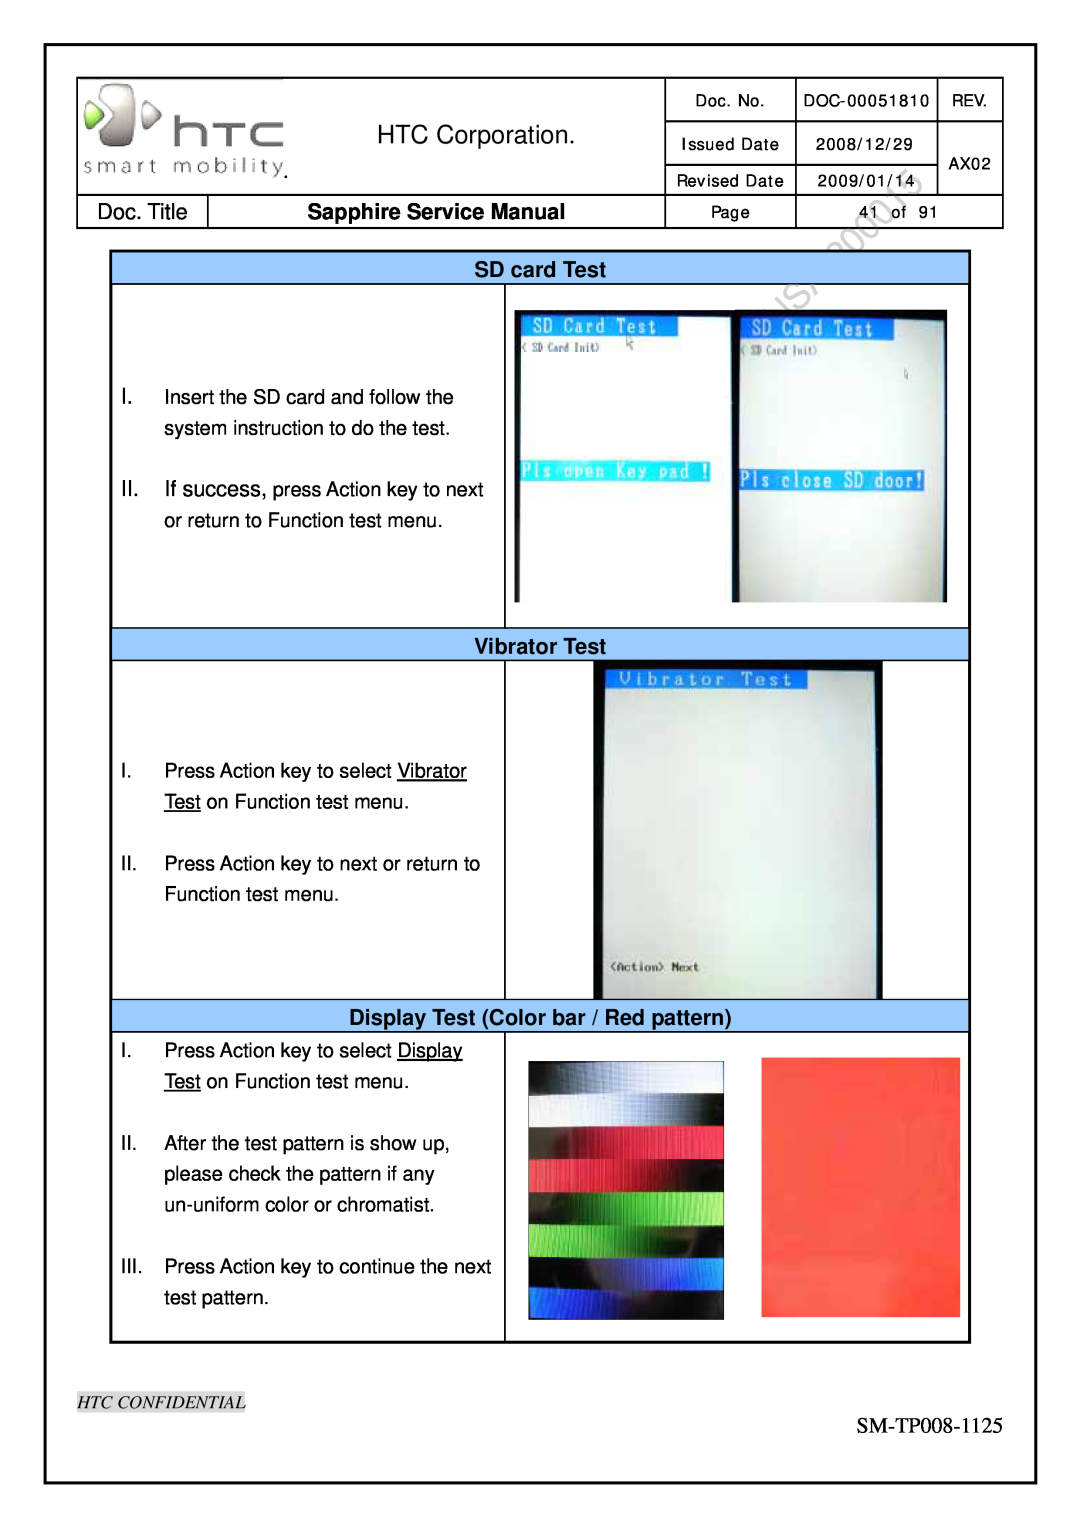 HTC SM-TP008-1125 service manual SD card Test, Vibrator Test, Display Test Color bar / Red pattern, HTC Corporation 